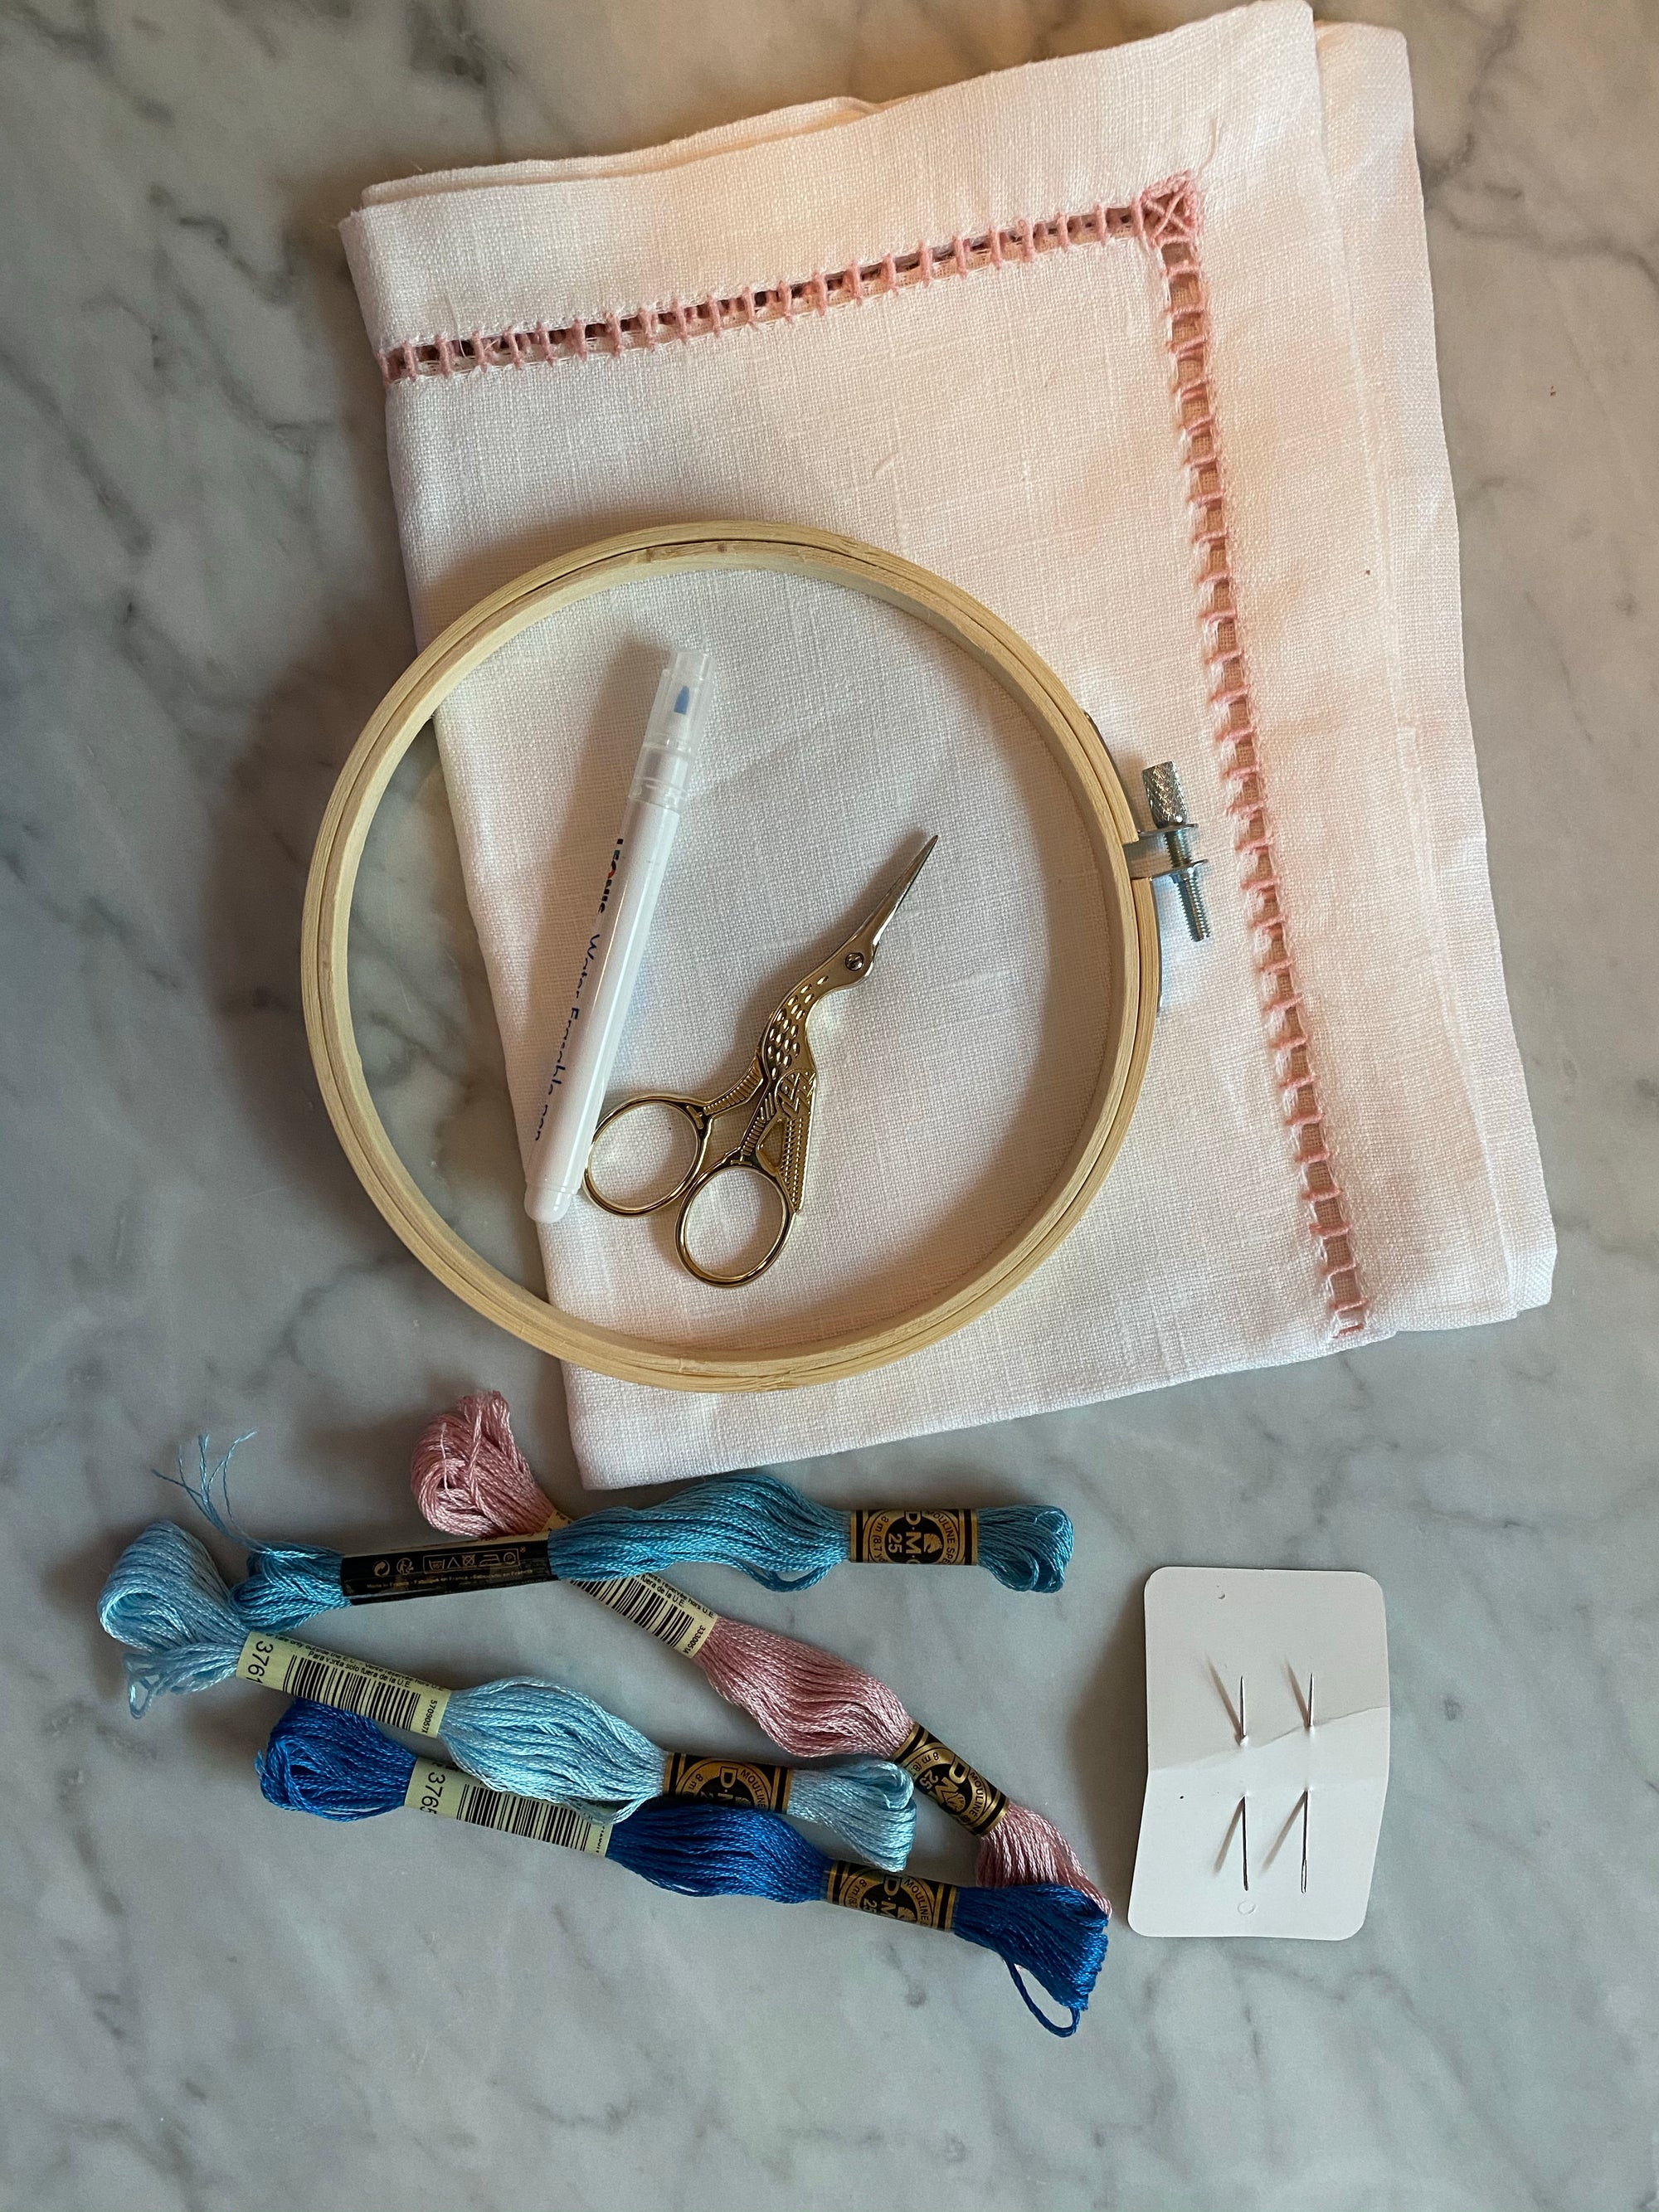 Embroidery Supplies Starter Kit